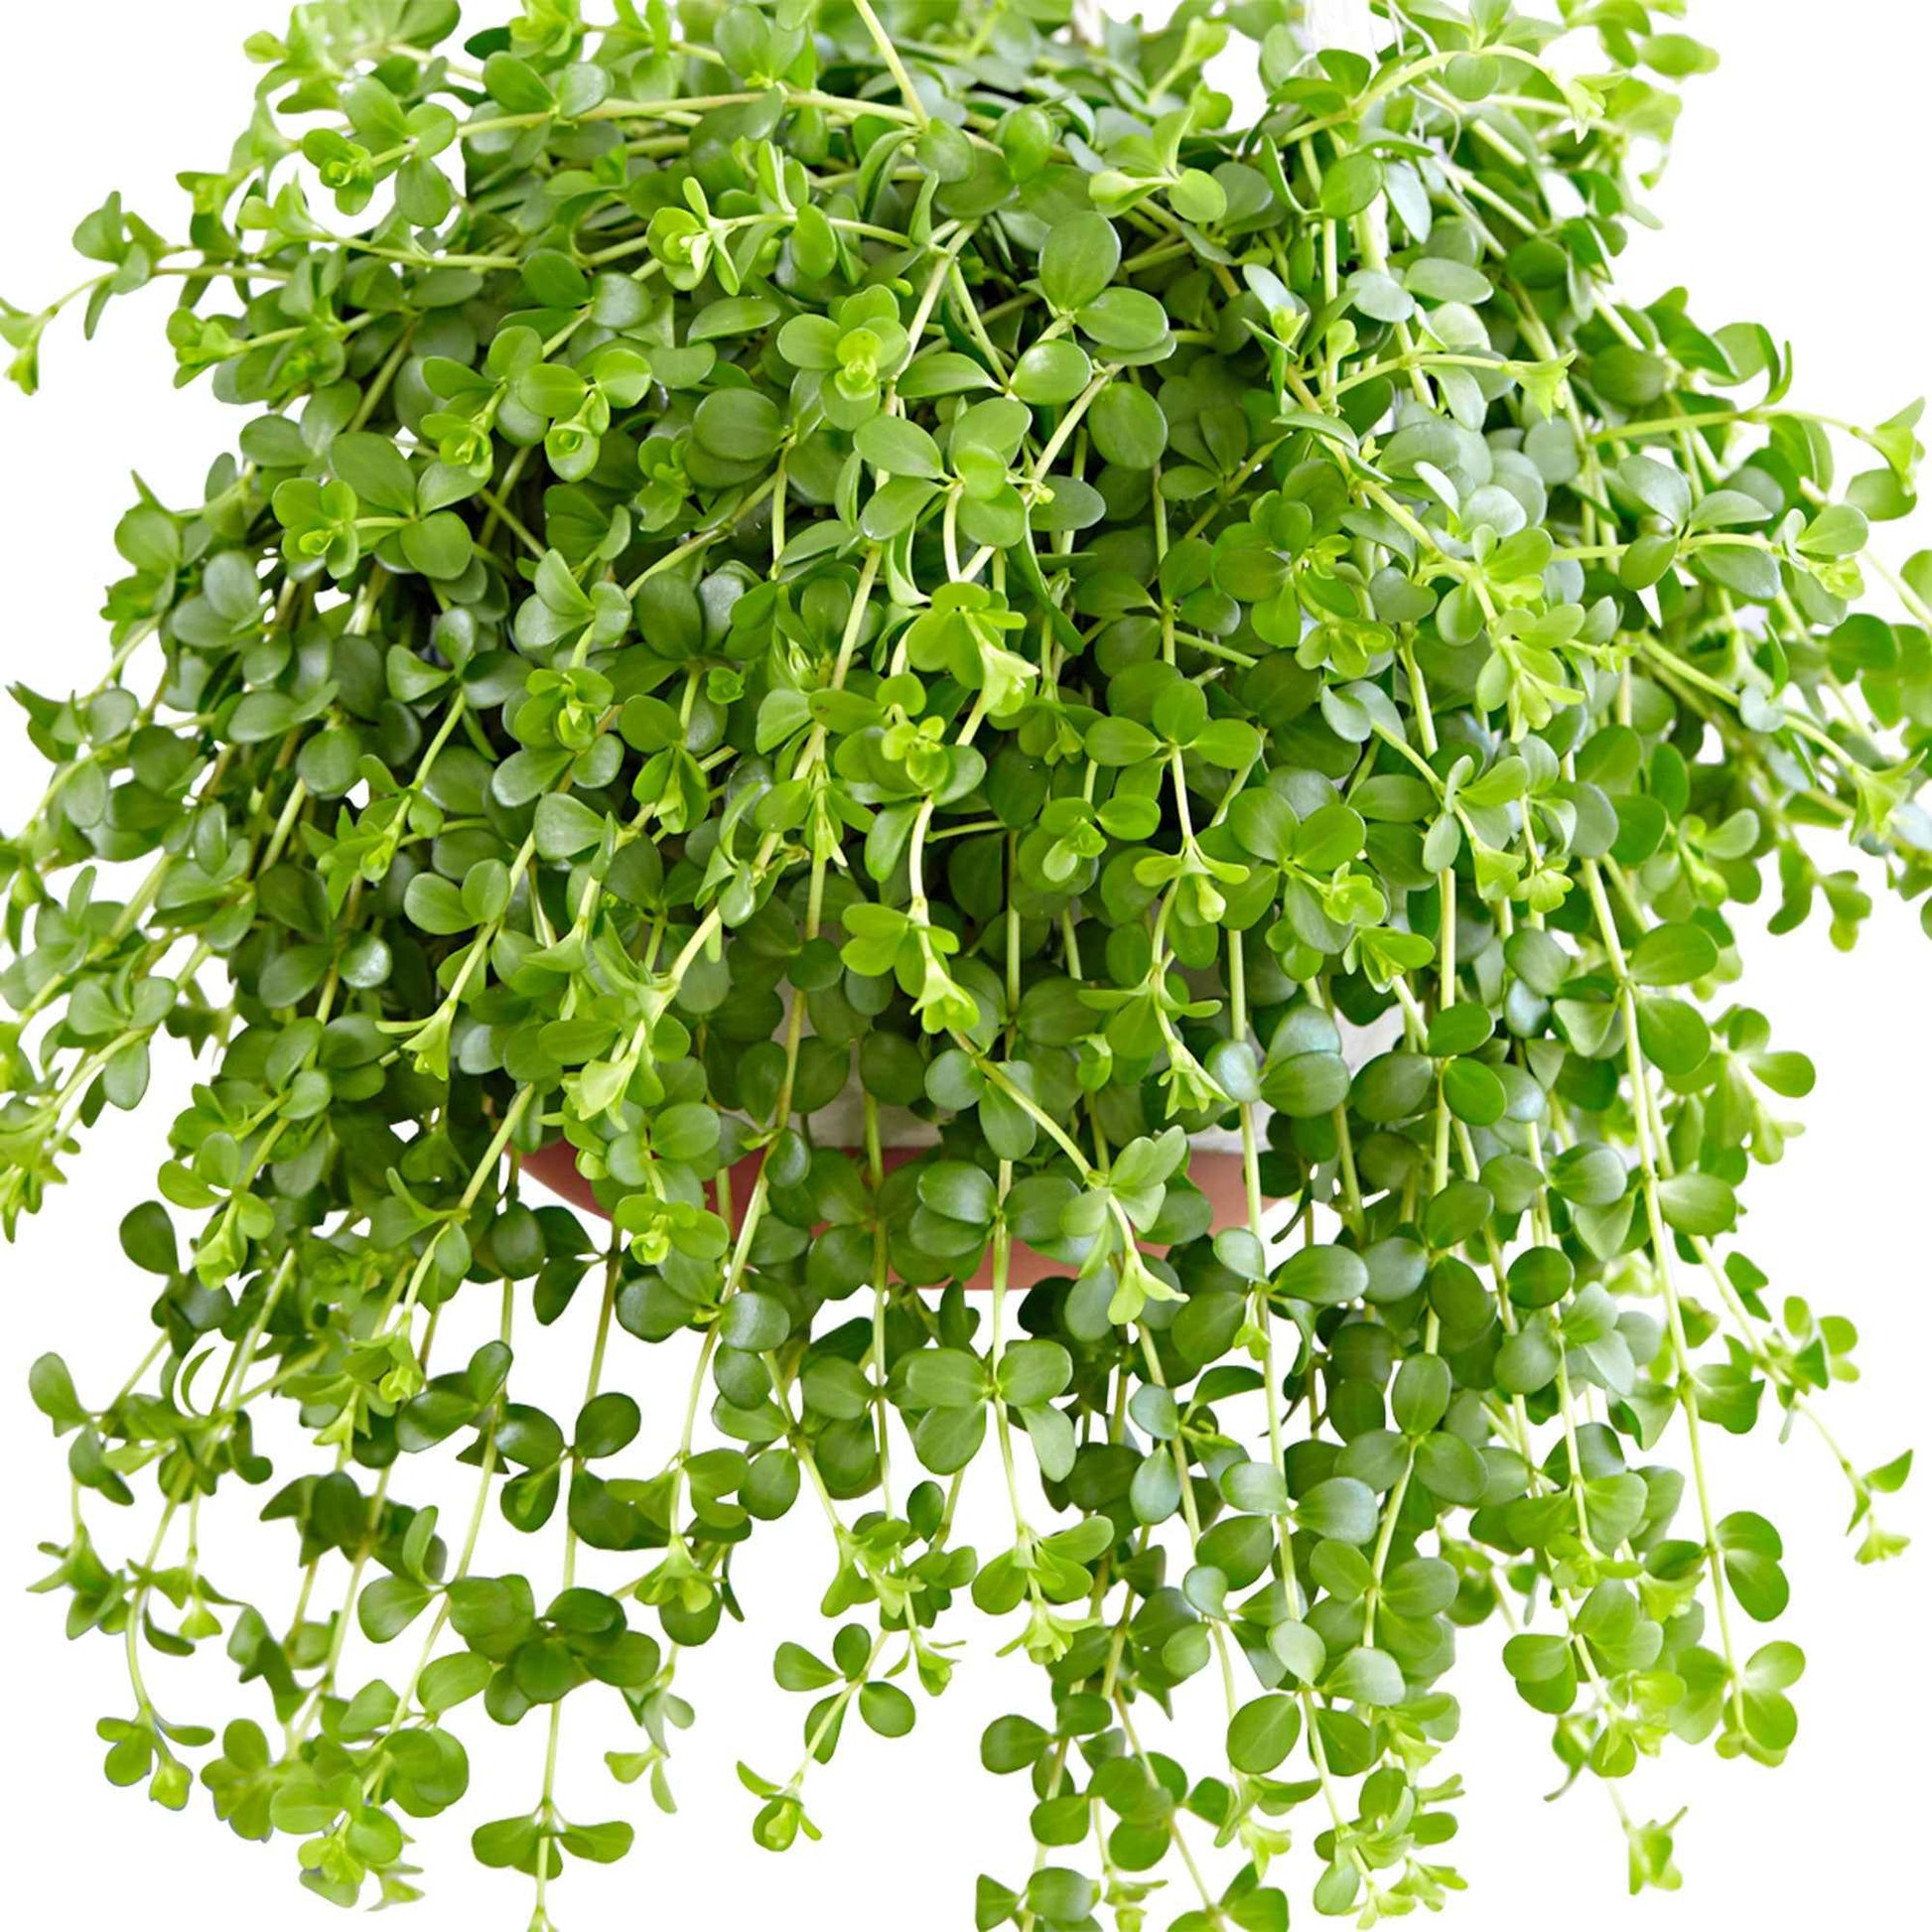 Peperplantje 'Isabelle' - Peperomia isabelle - Type kamerplant